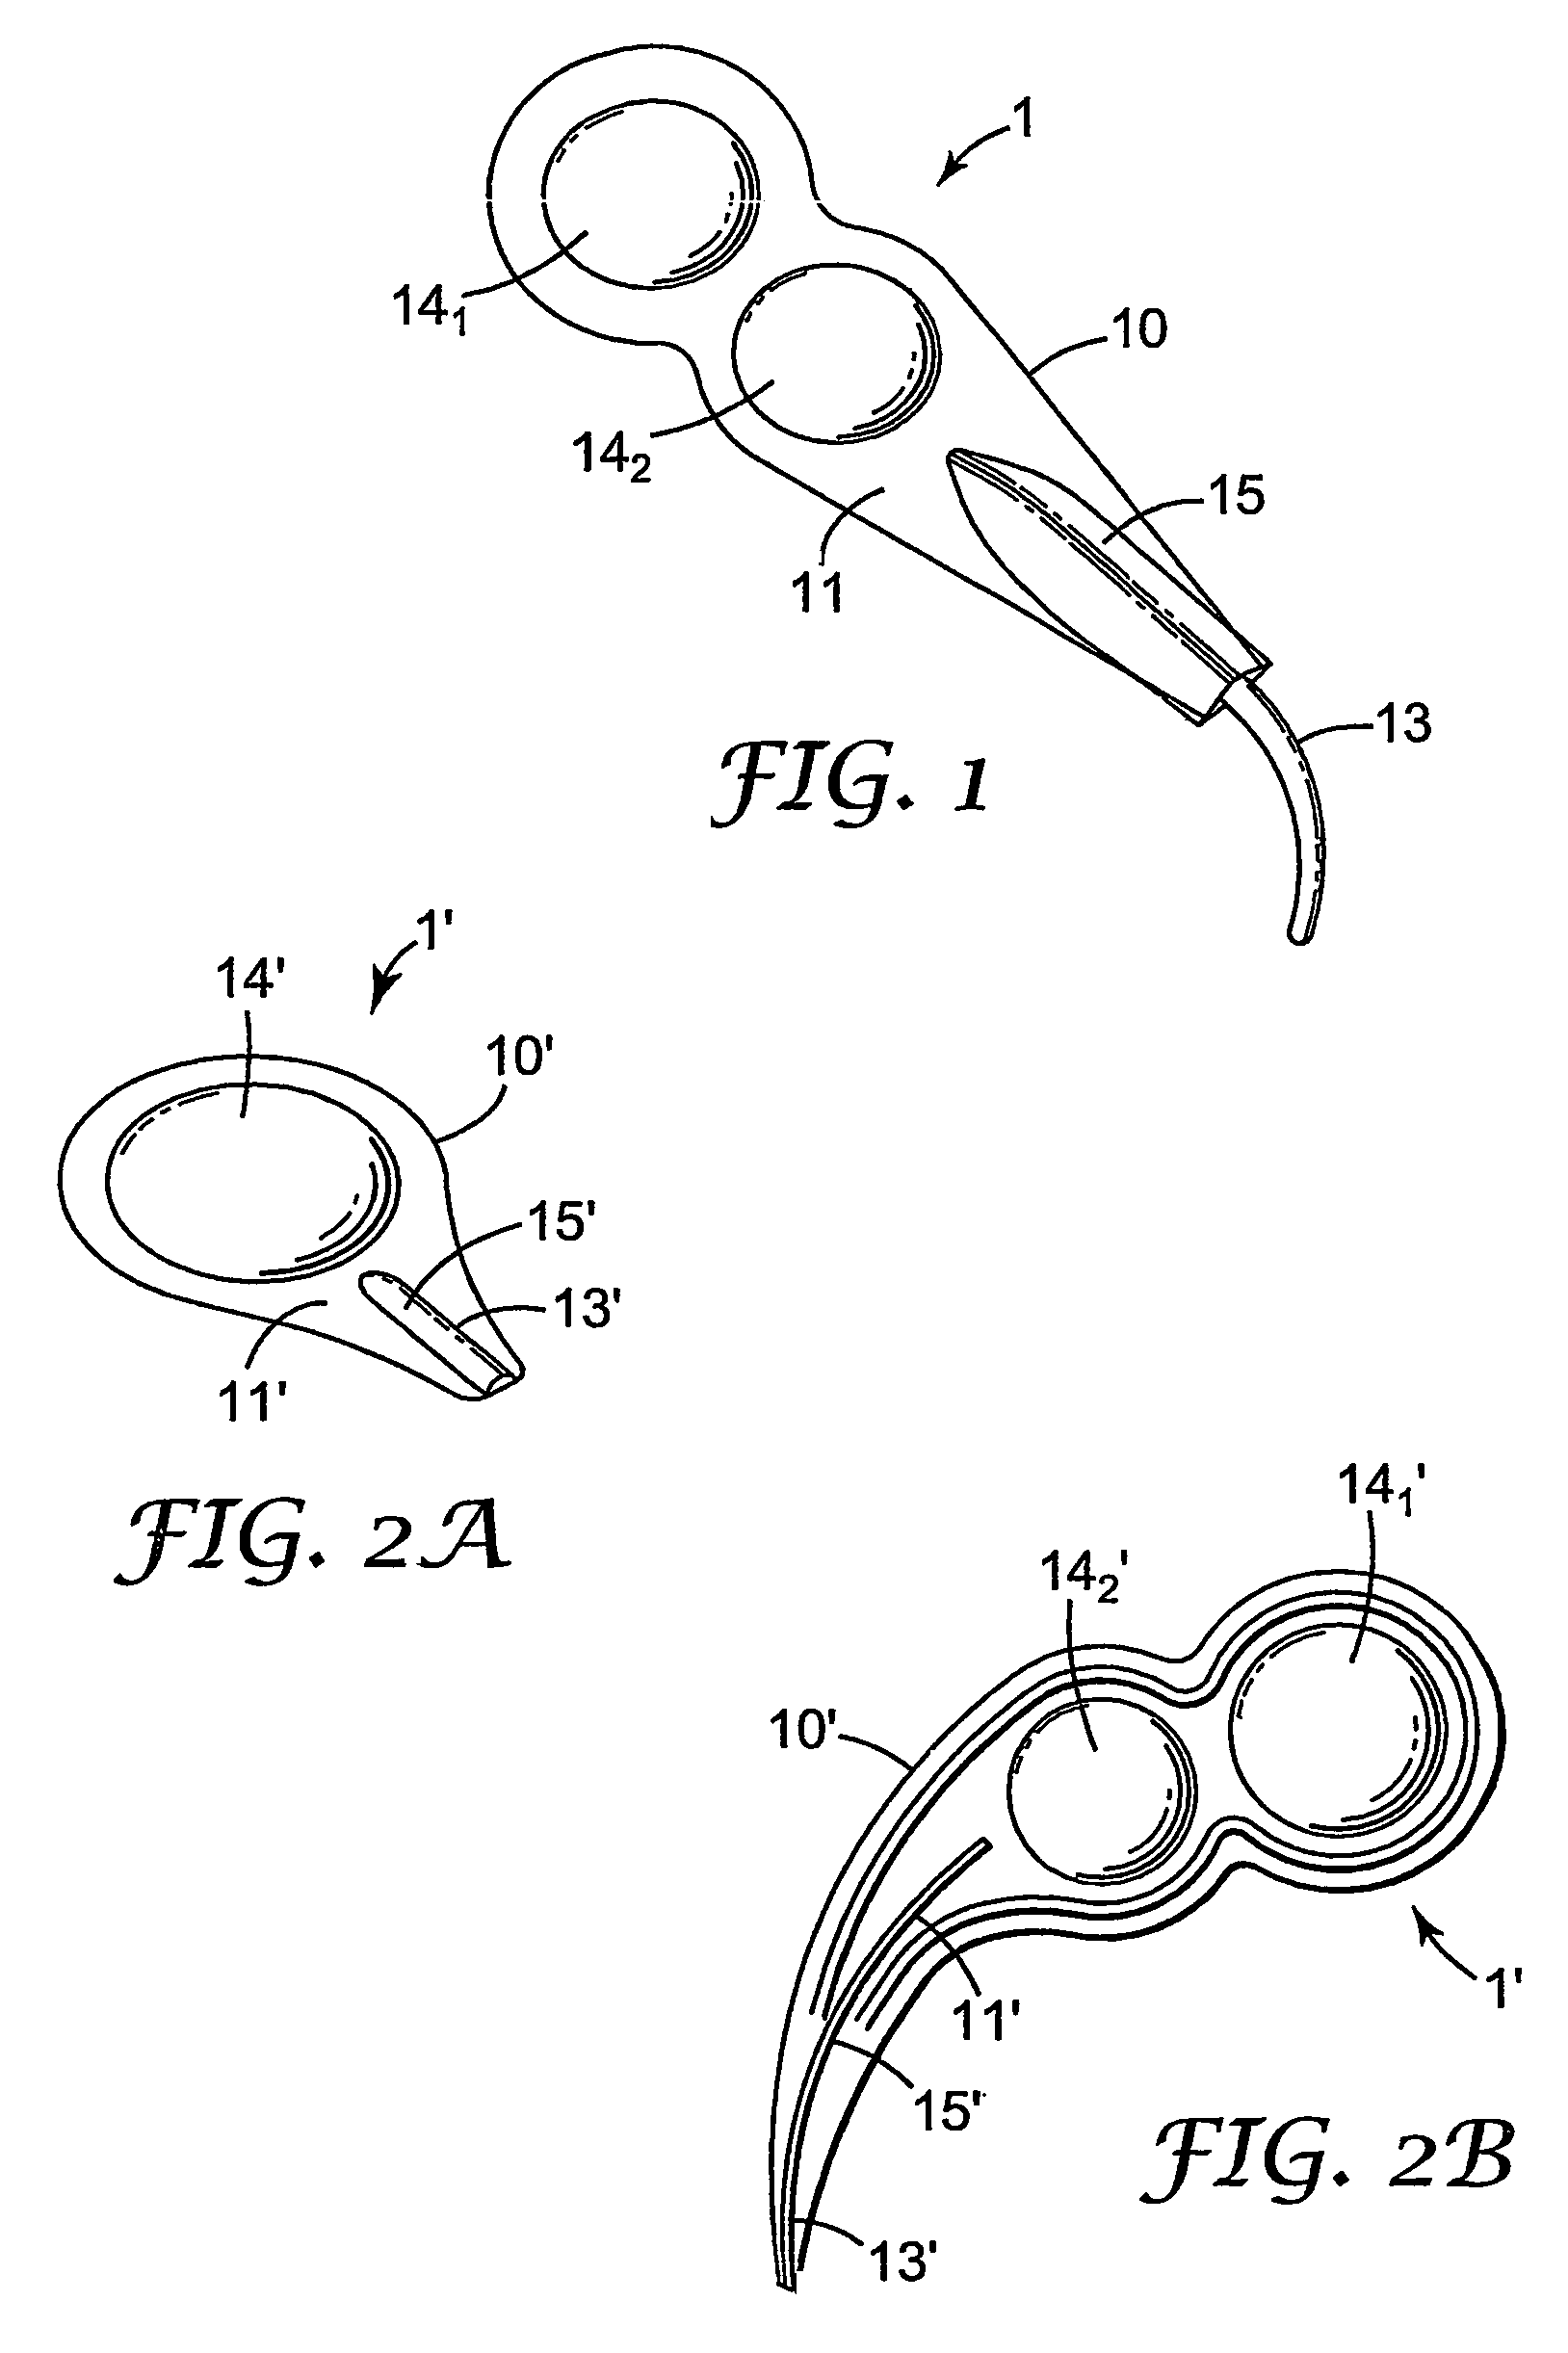 Device for storing and dispensing a flowable substance